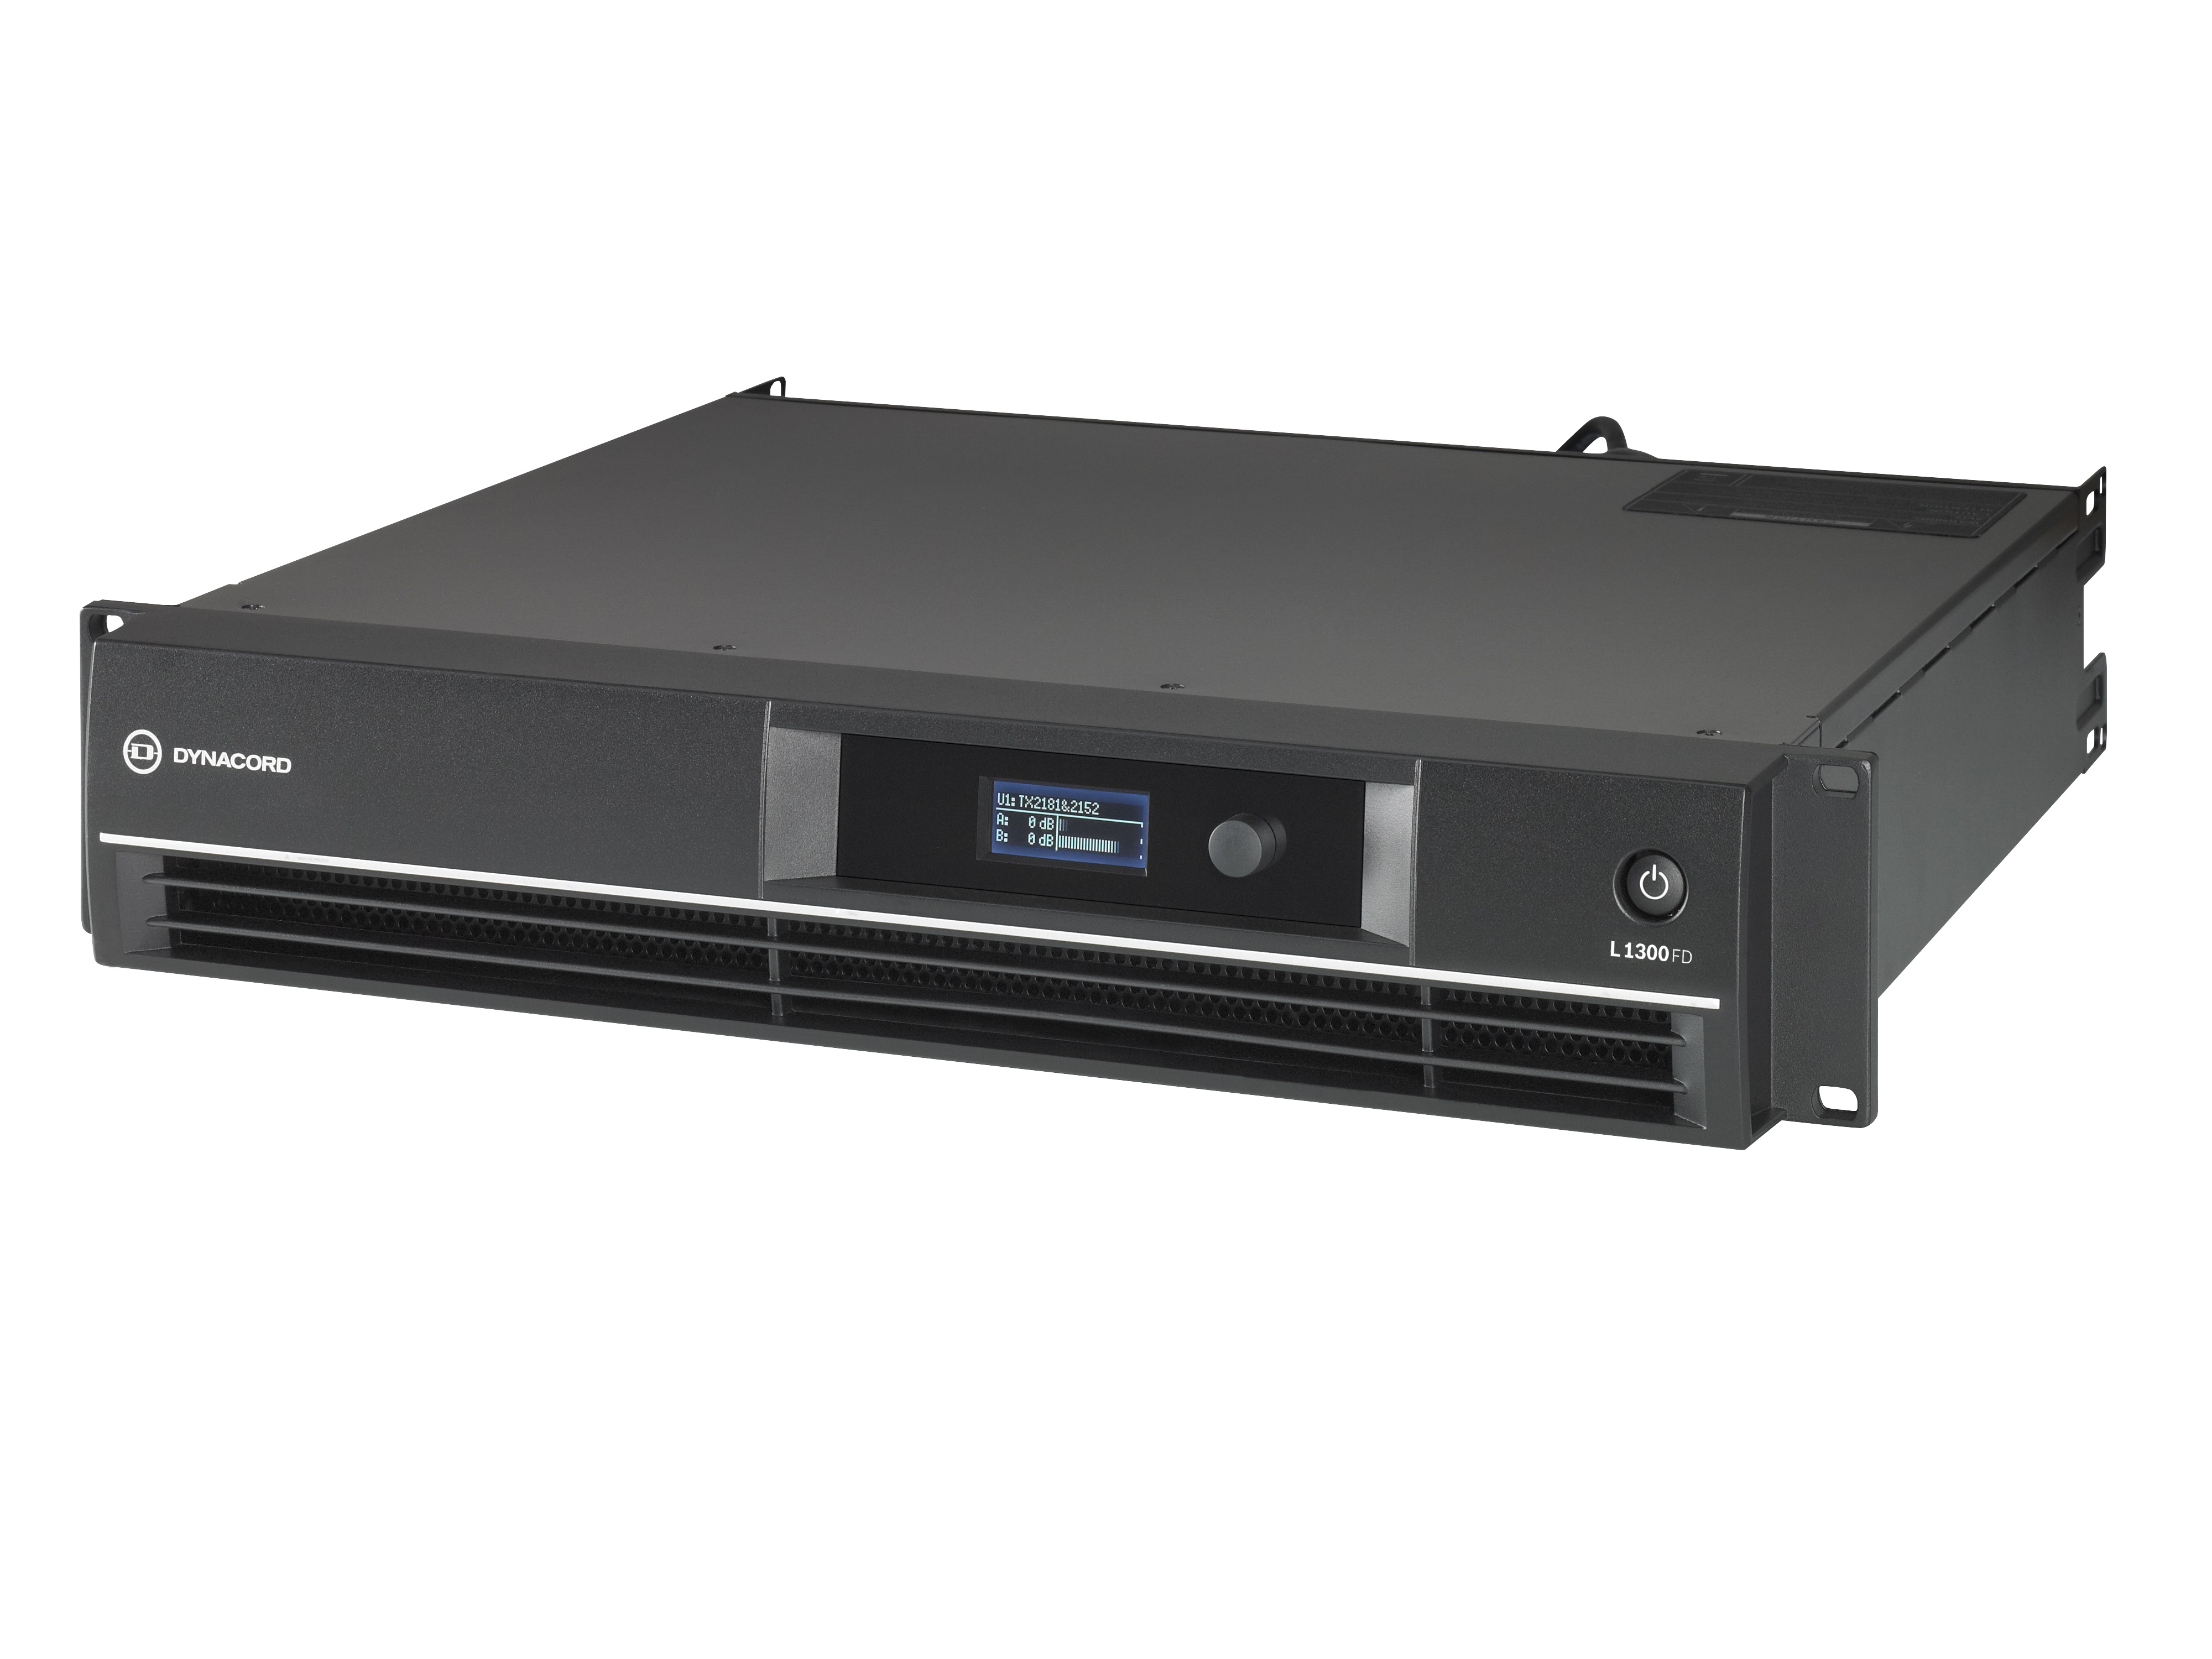 L1300FD-US DSP Power Amplifier 2x650W with FIR Drive/XLR/NL4 Connectors by Dynacord